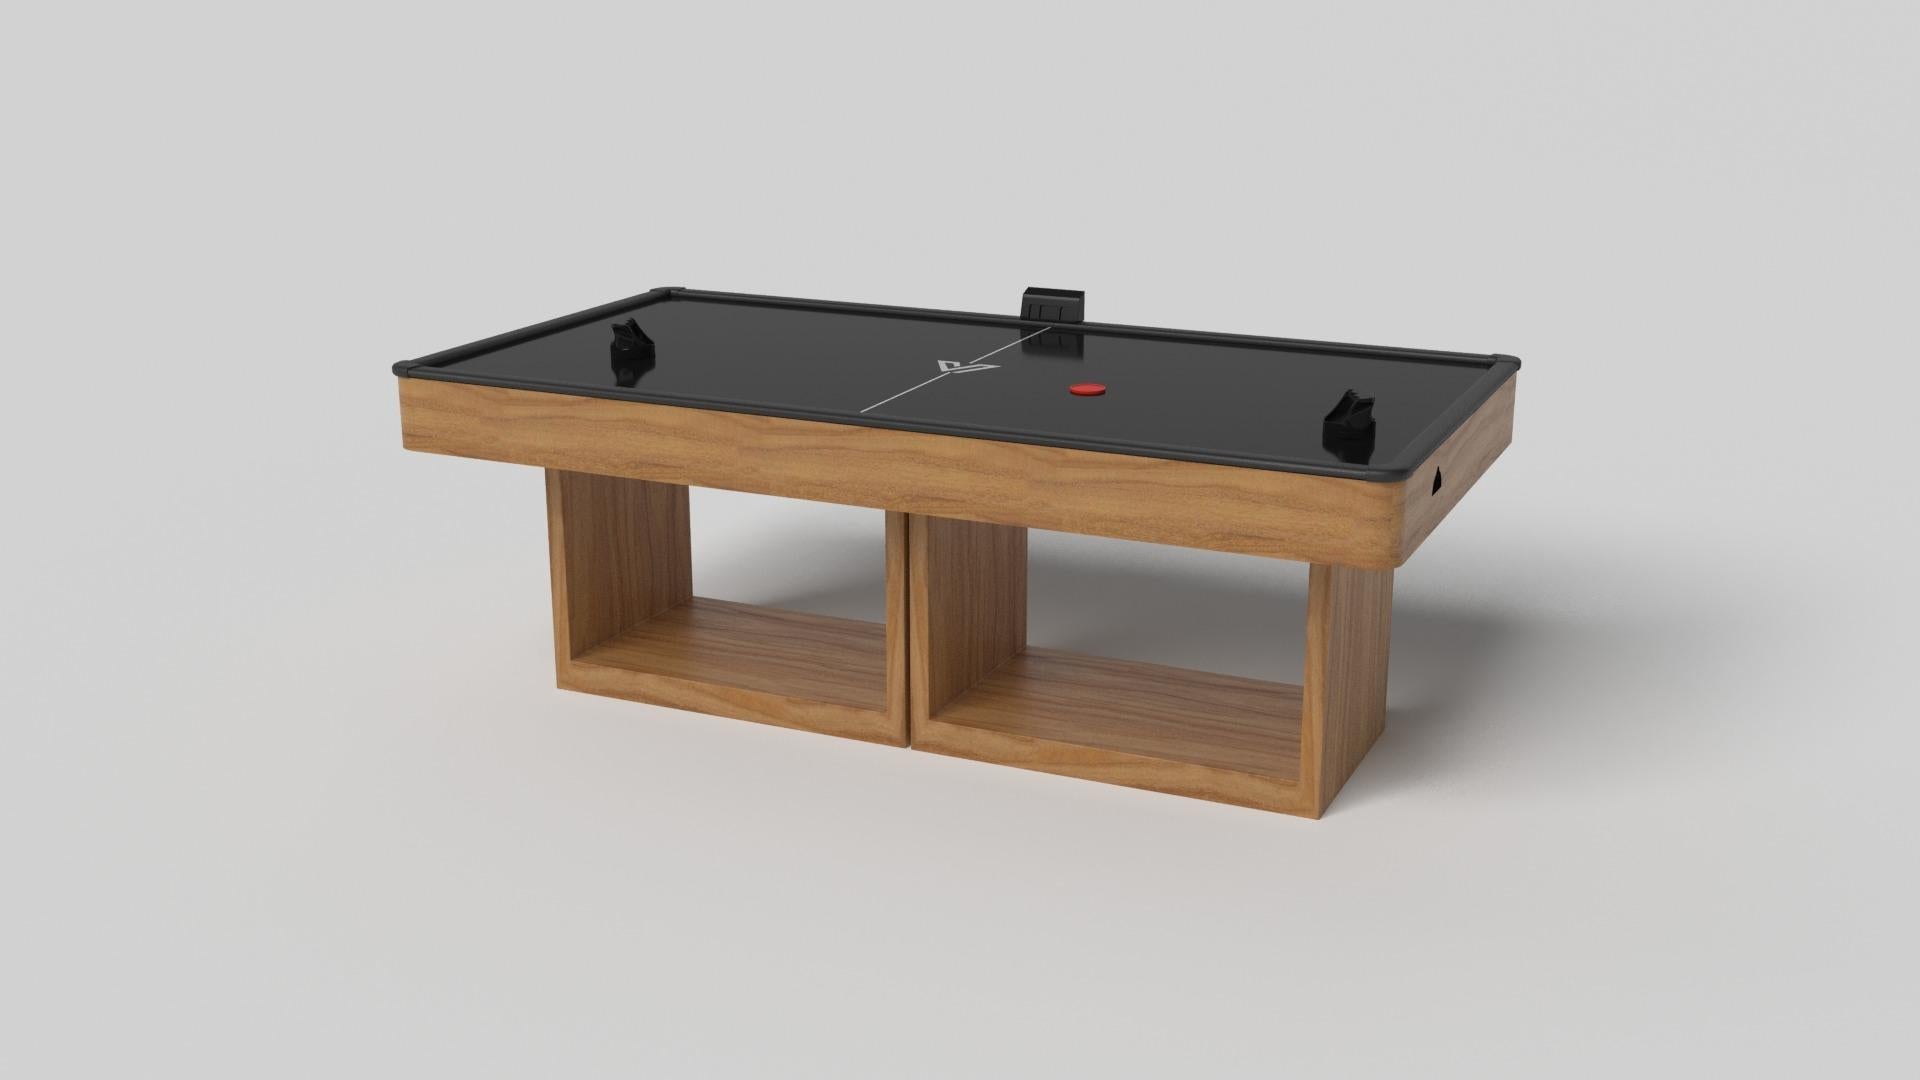 Supported by two rectangular open pedestals as the base, this handcrafted air hockey table is modern and minimalistic with its combination of simple, geometric forms. Viewed from the front, the use of negative space is evident; viewed from the side,